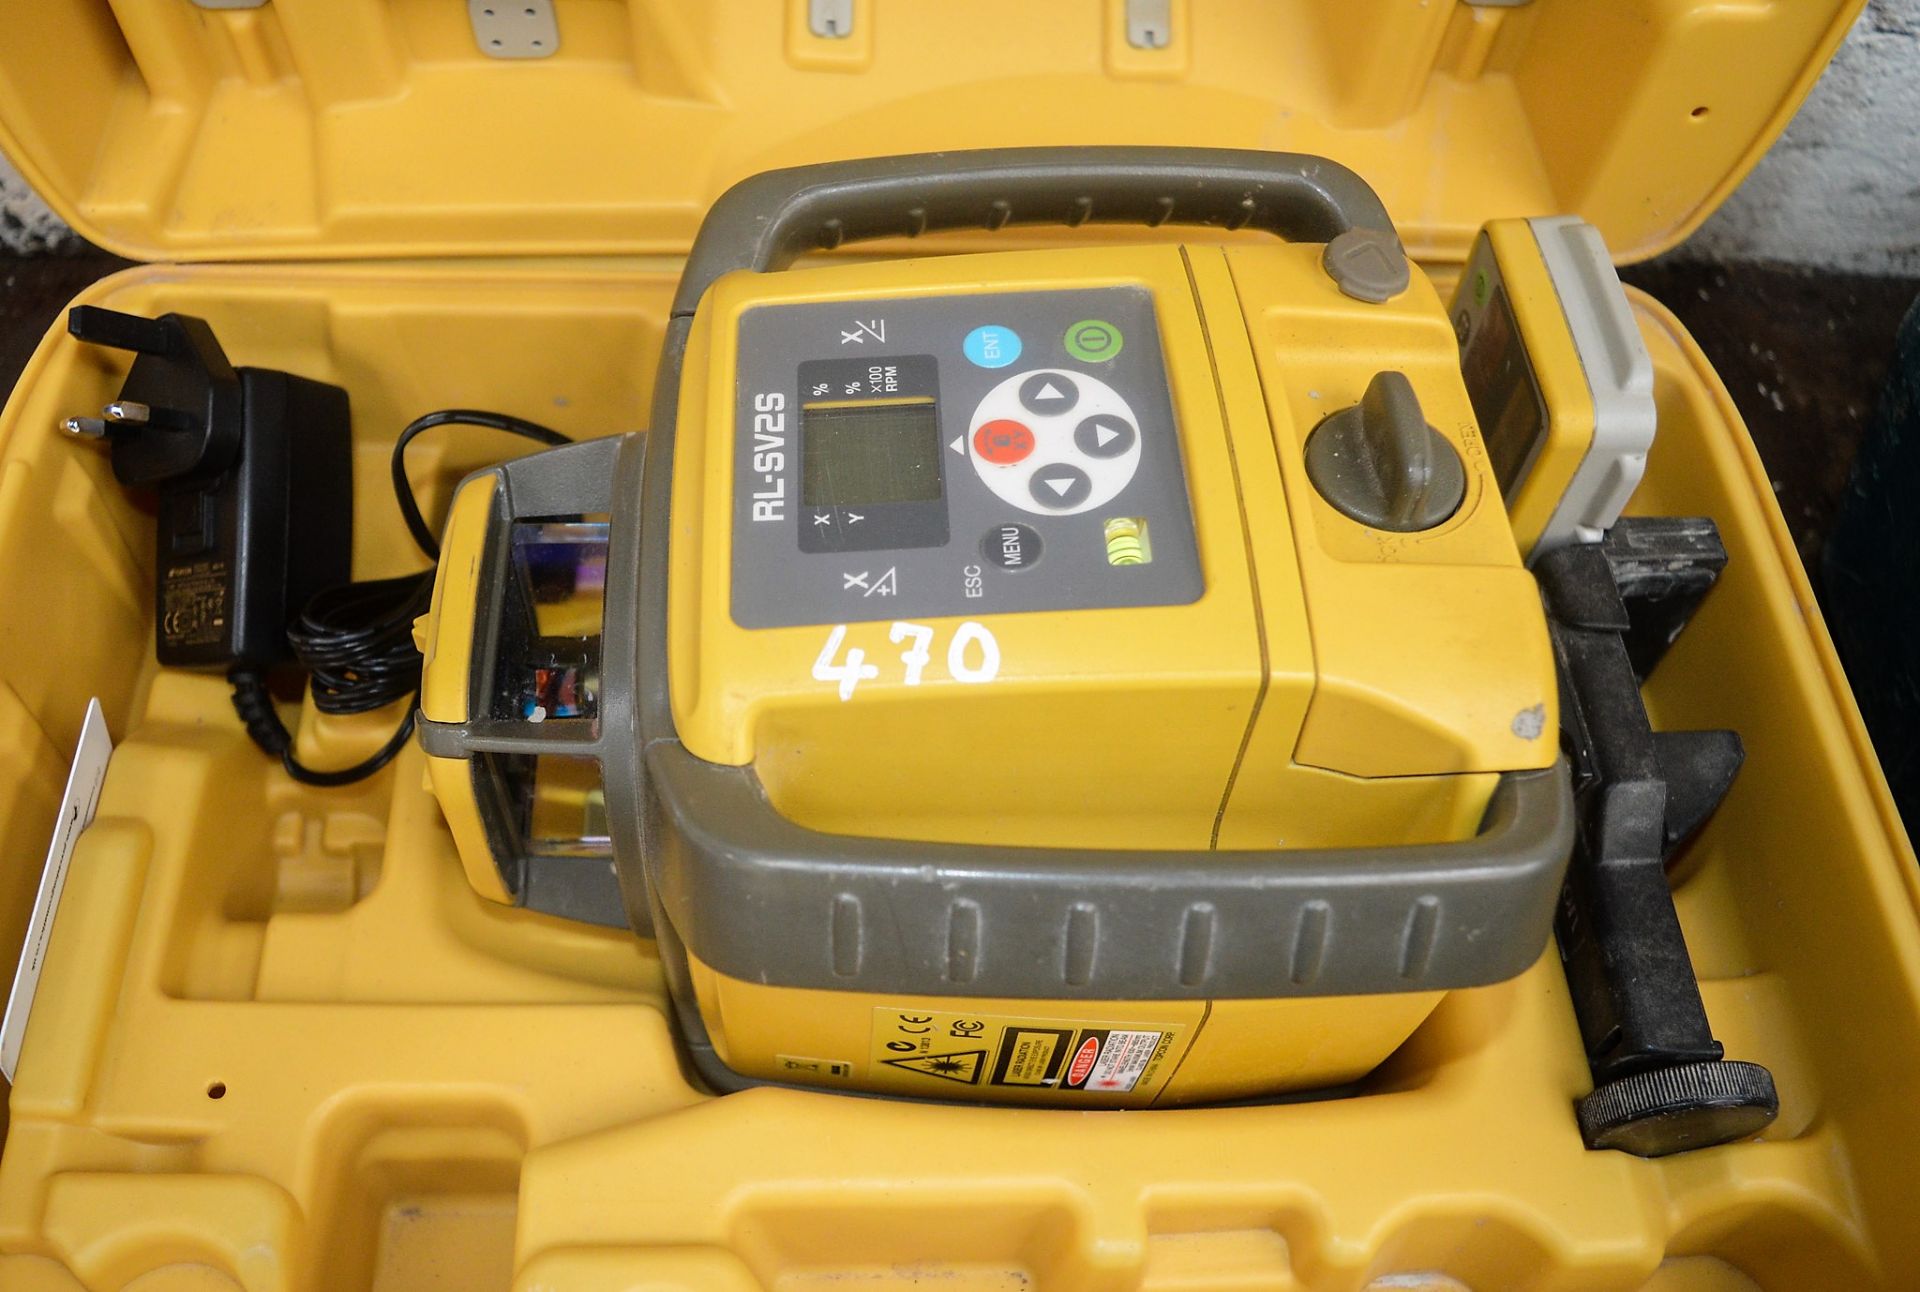 Topcon RL-SV2S rotating laser level c/w charger, sensor & carry case A610297